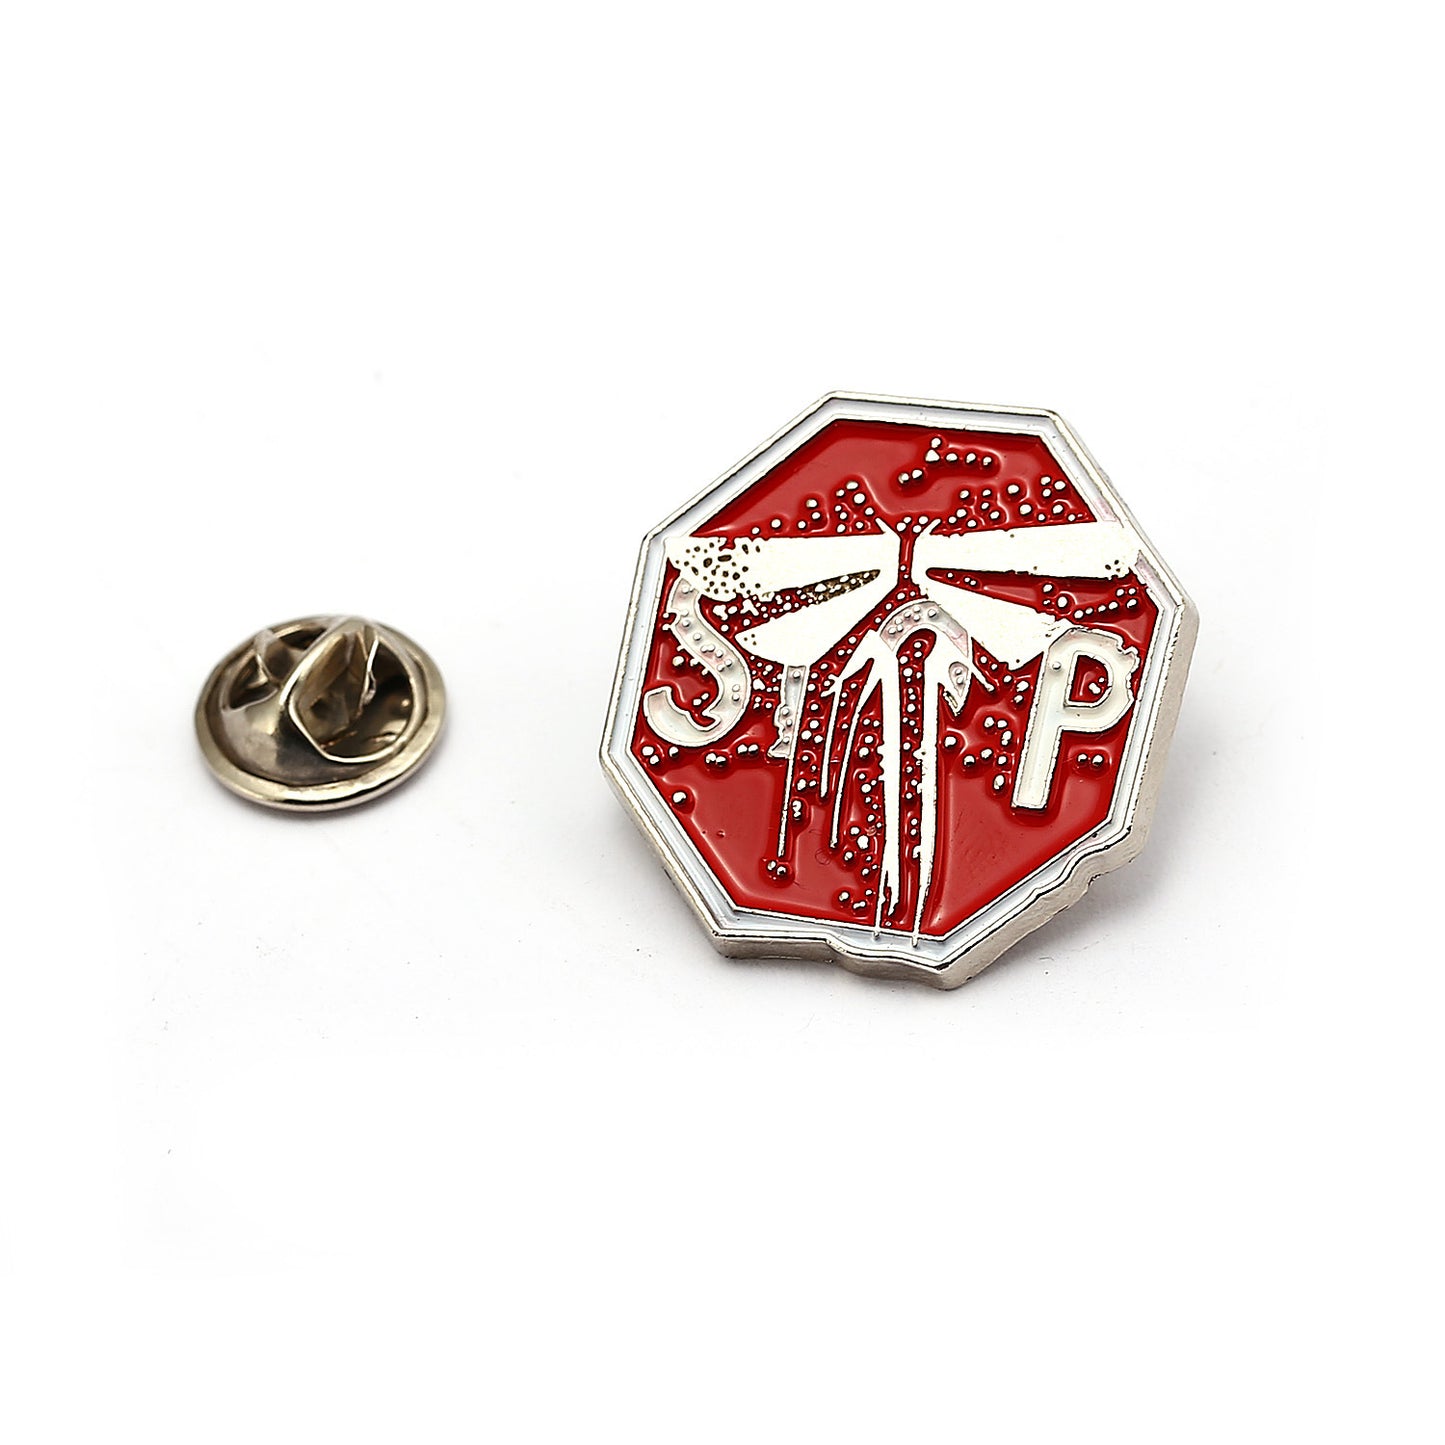 The Last Of Us Metal Pins - Firefly Available at 2Fast2See.co